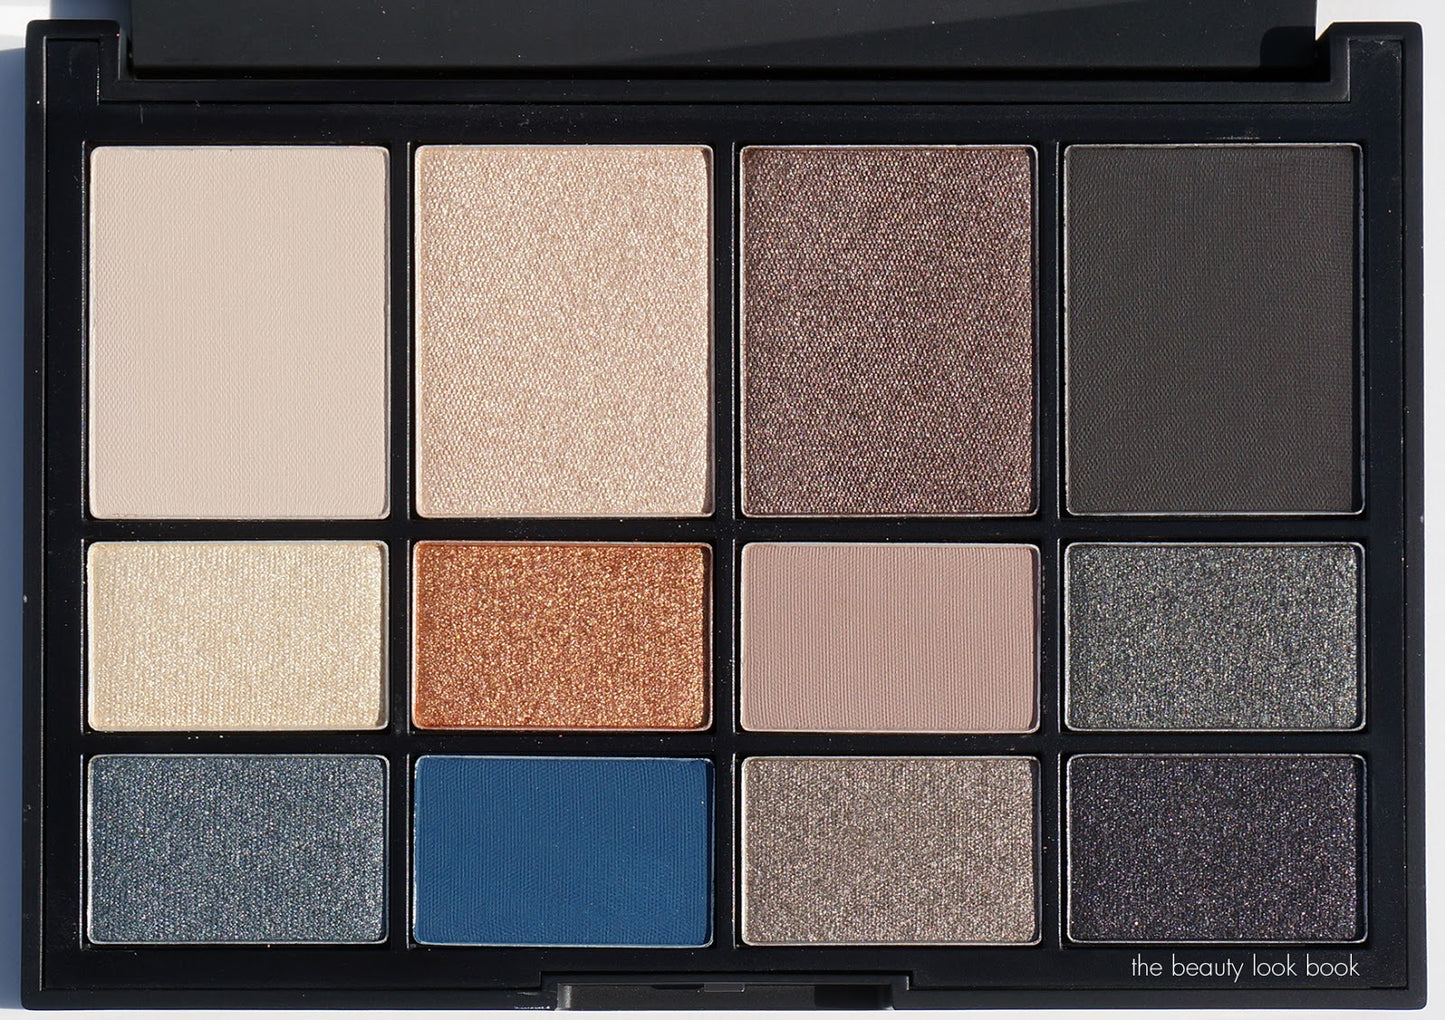 Nars Narsissist L'amour Toujours Eyeshadow Palette Limited Edition